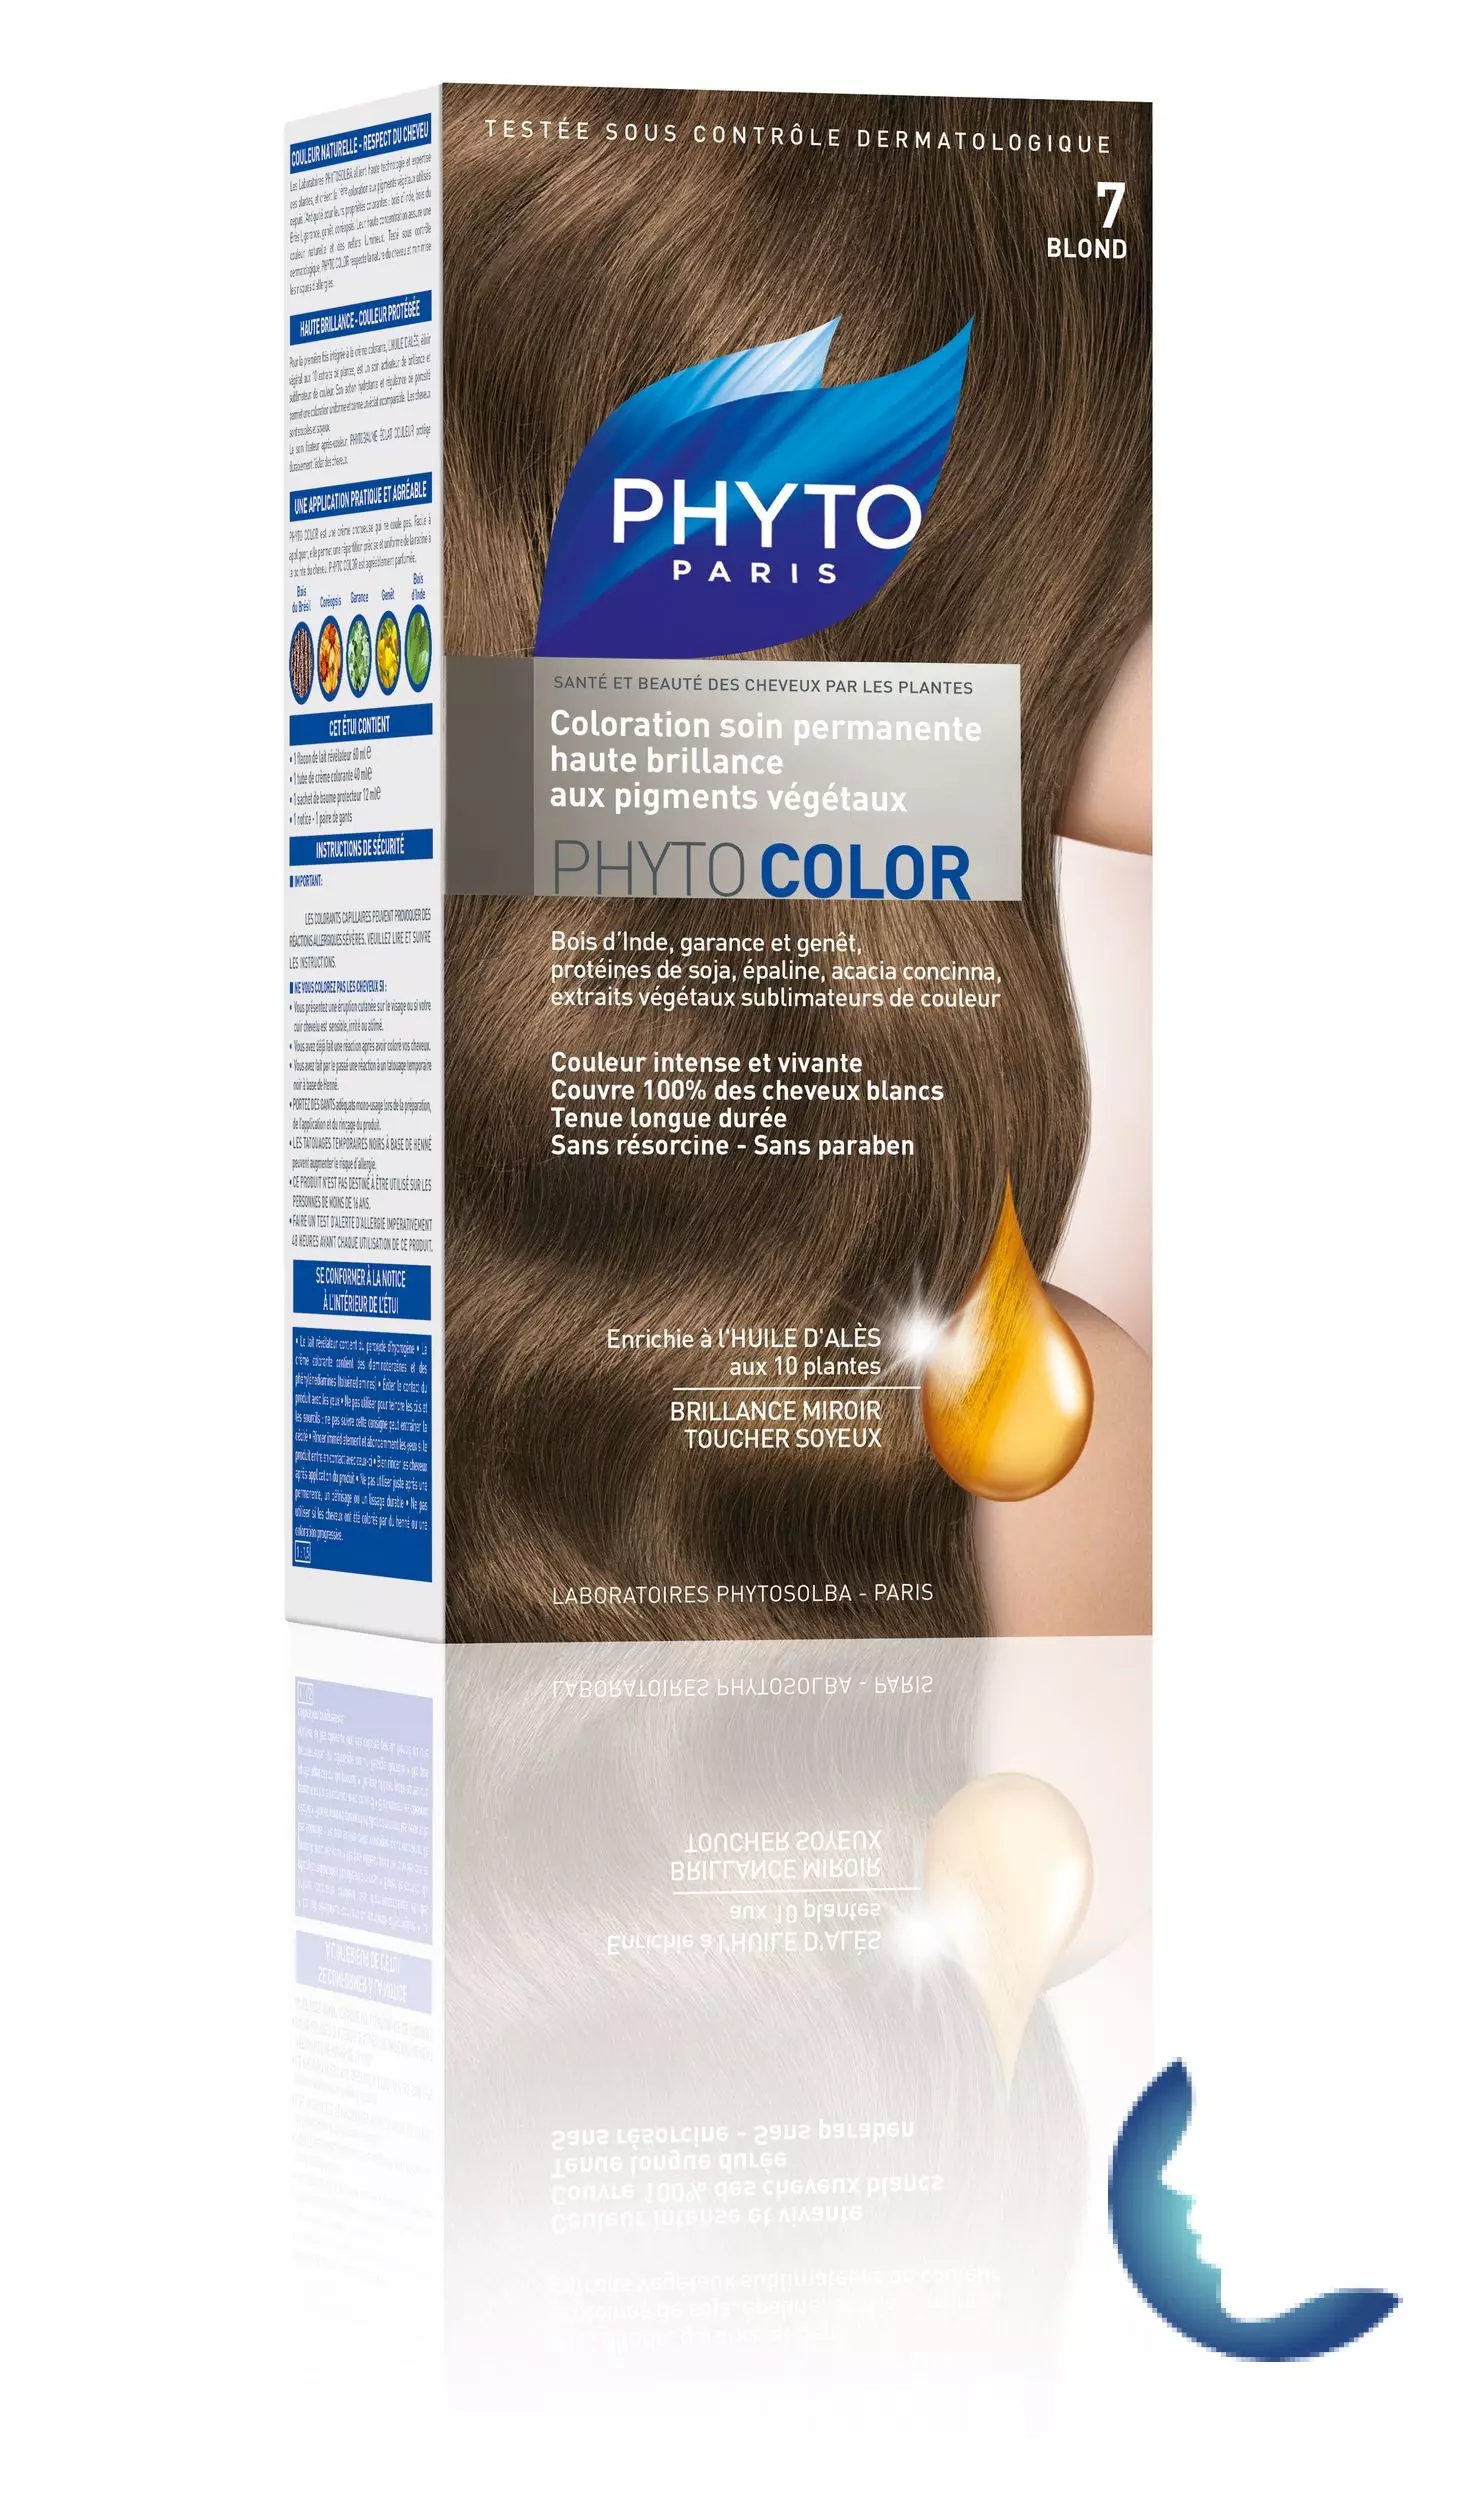 PHYTO Phytocolor Couleur Soin 7 Blond, 1 kit